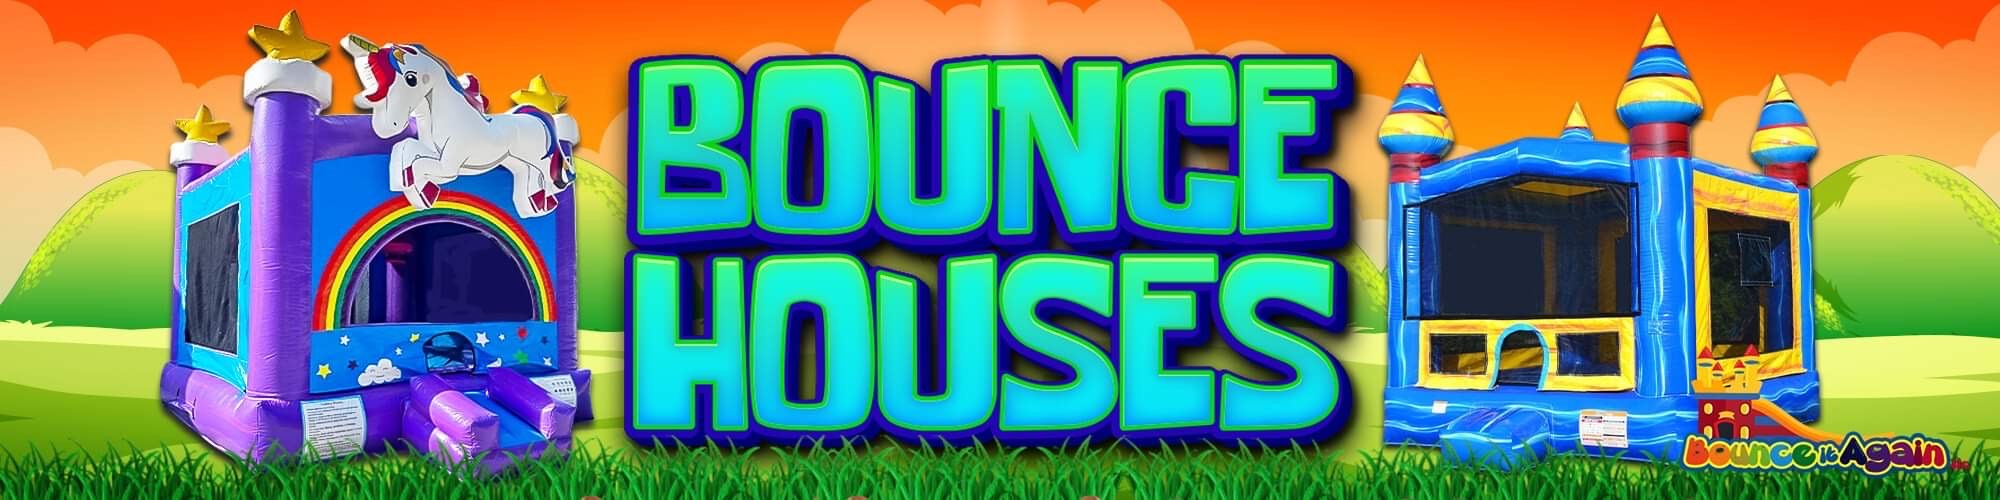 Bounce House Rentals - Bounce It Again 